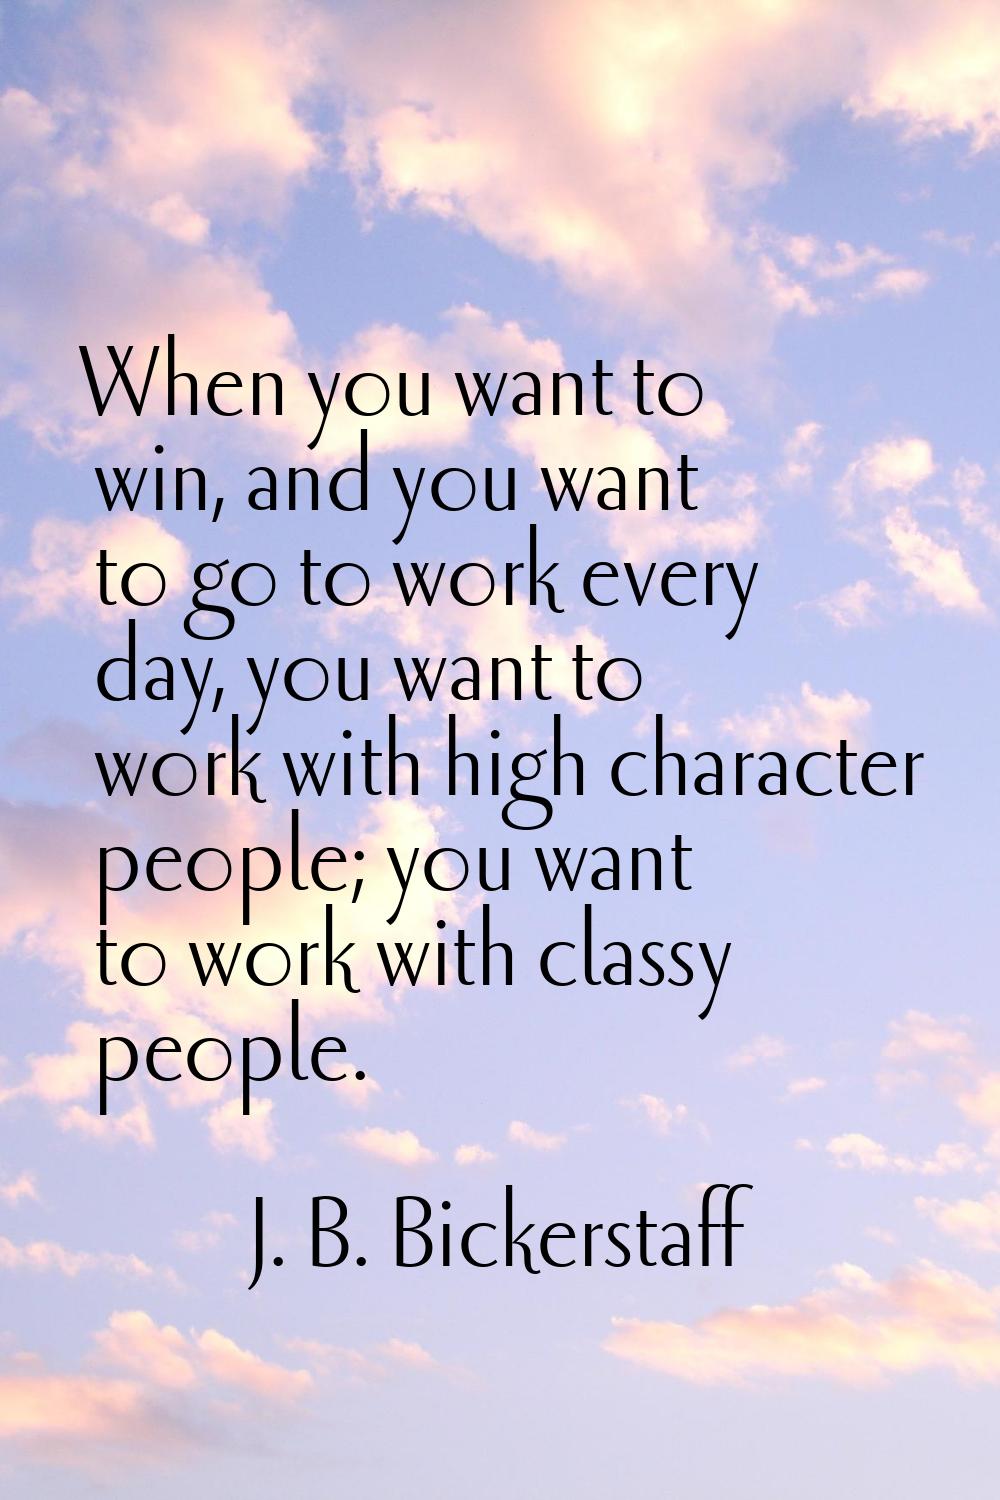 When you want to win, and you want to go to work every day, you want to work with high character pe